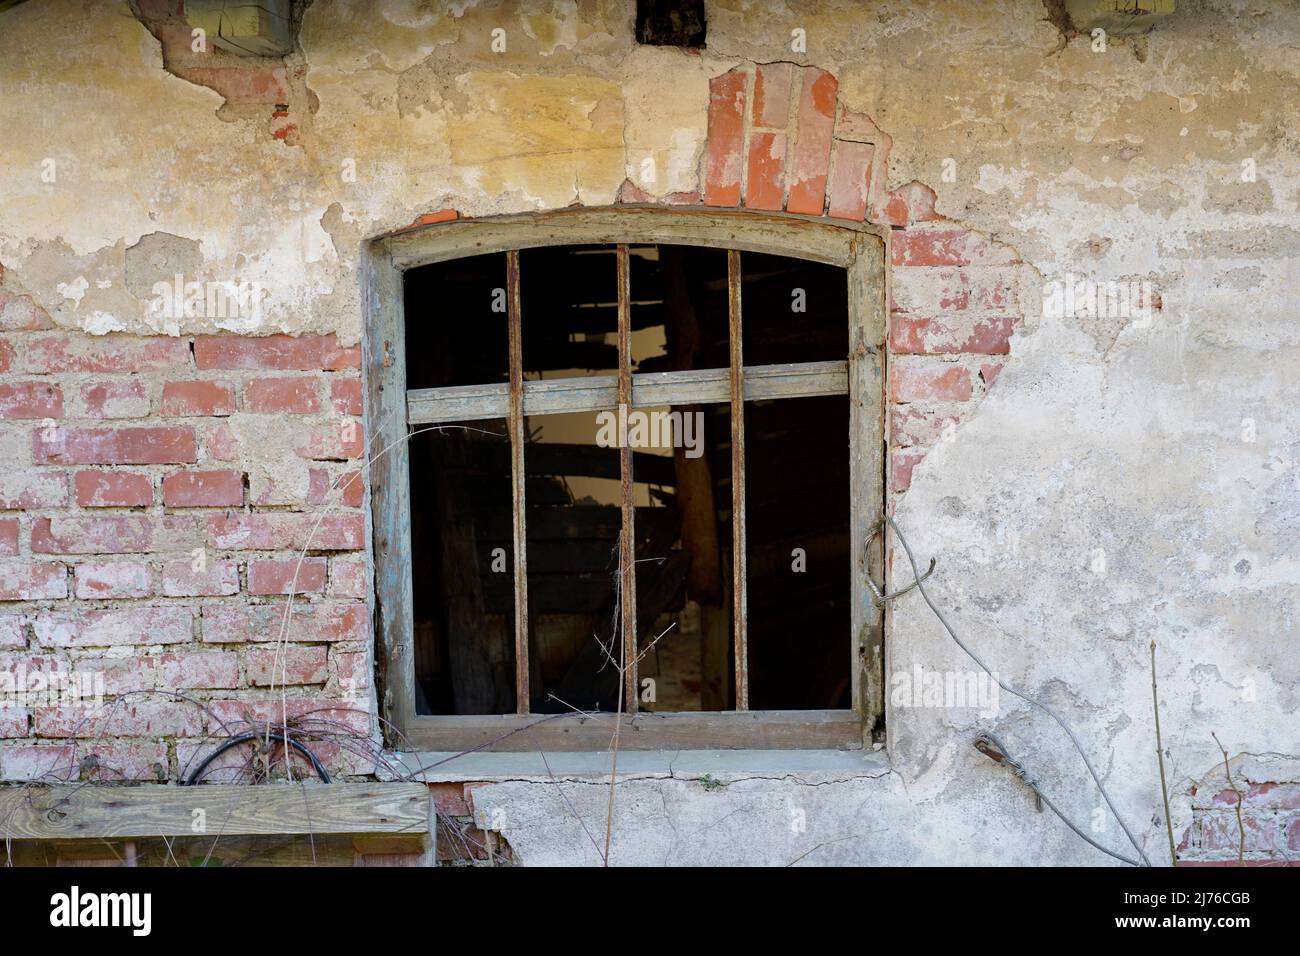 Germany, Bavaria, Upper Bavaria, Altötting district, old vacant country house, dilapidated, window, pane broken, detail Stock Photo